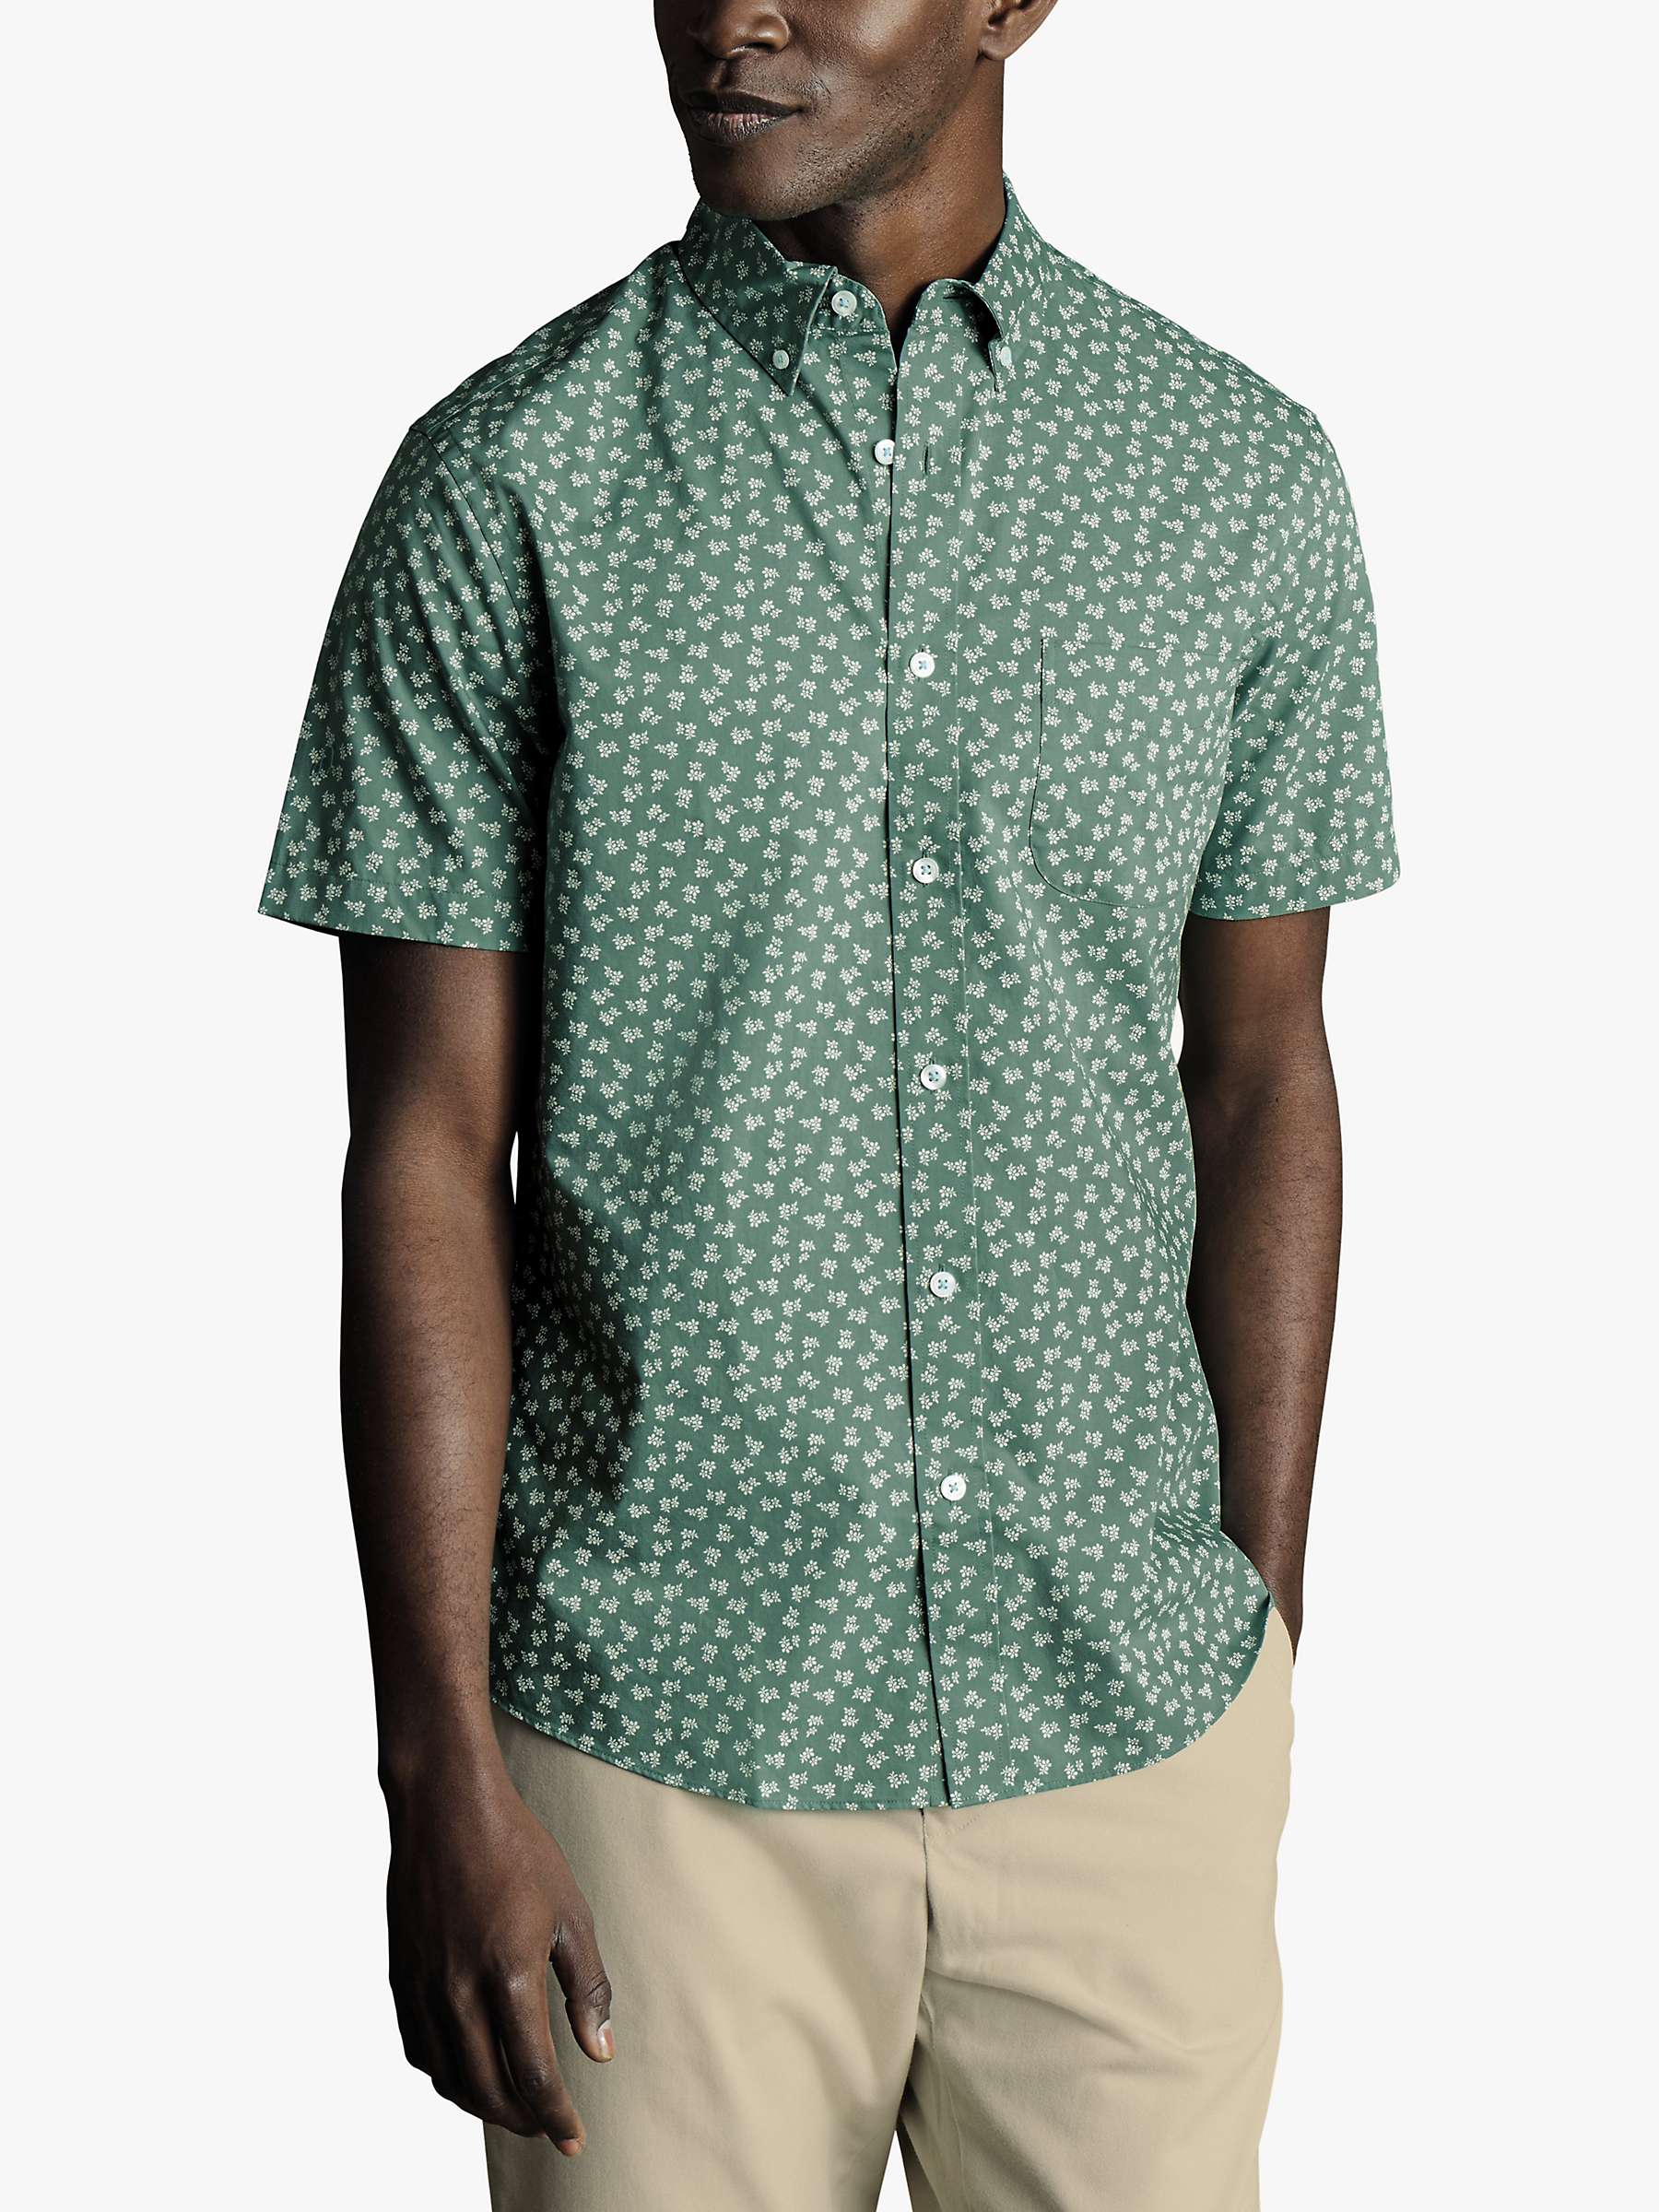 Buy Charles Tyrwhitt Slim Fit Floral Print Non-Iron Stretch Shirt, Teal/Multi Online at johnlewis.com